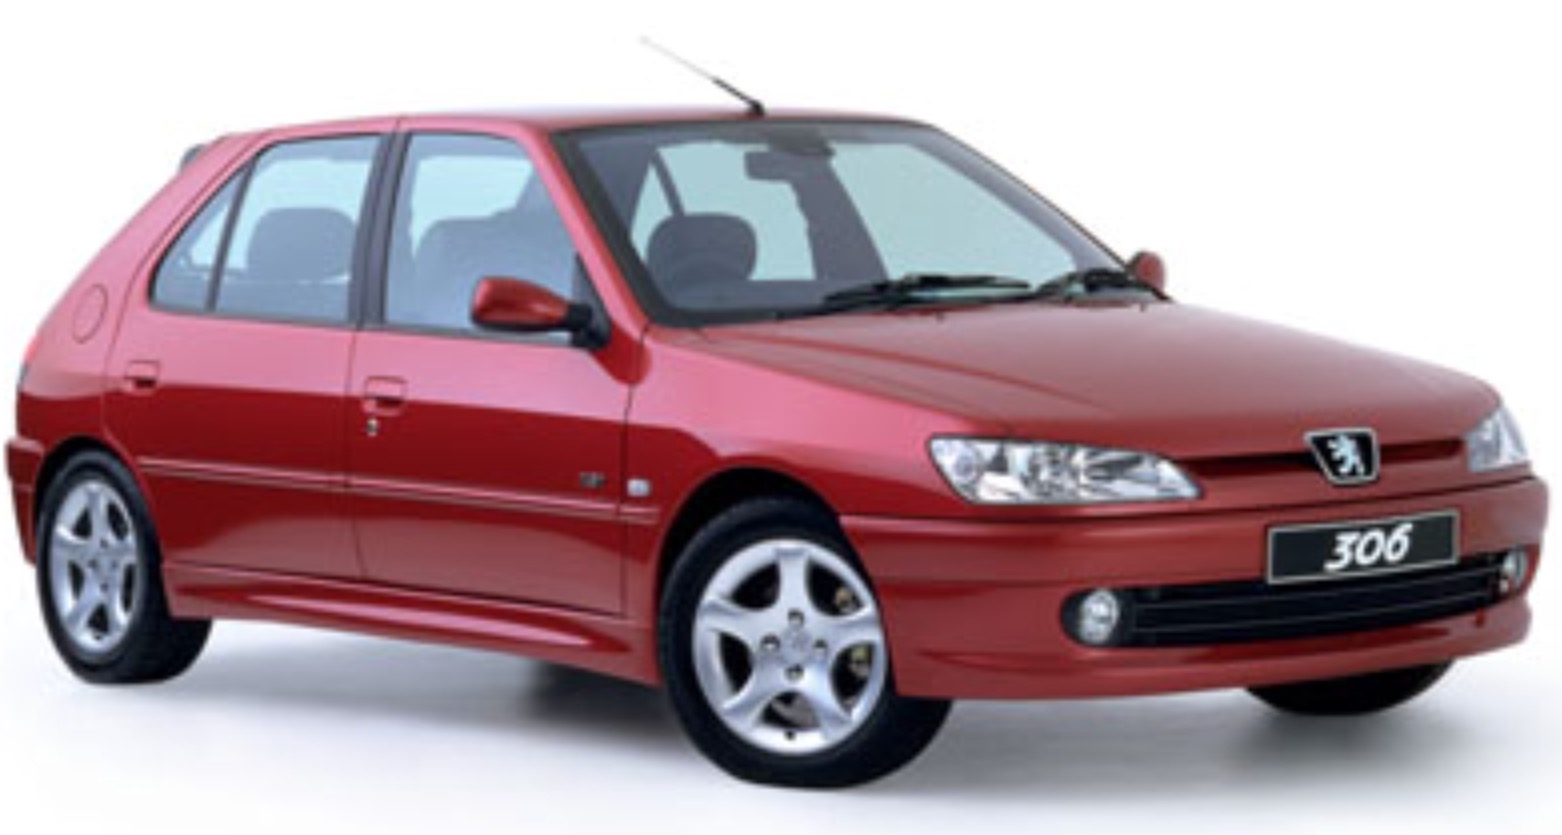 High Quality Tuning Files Peugeot 306 2.0 HDI 135hp